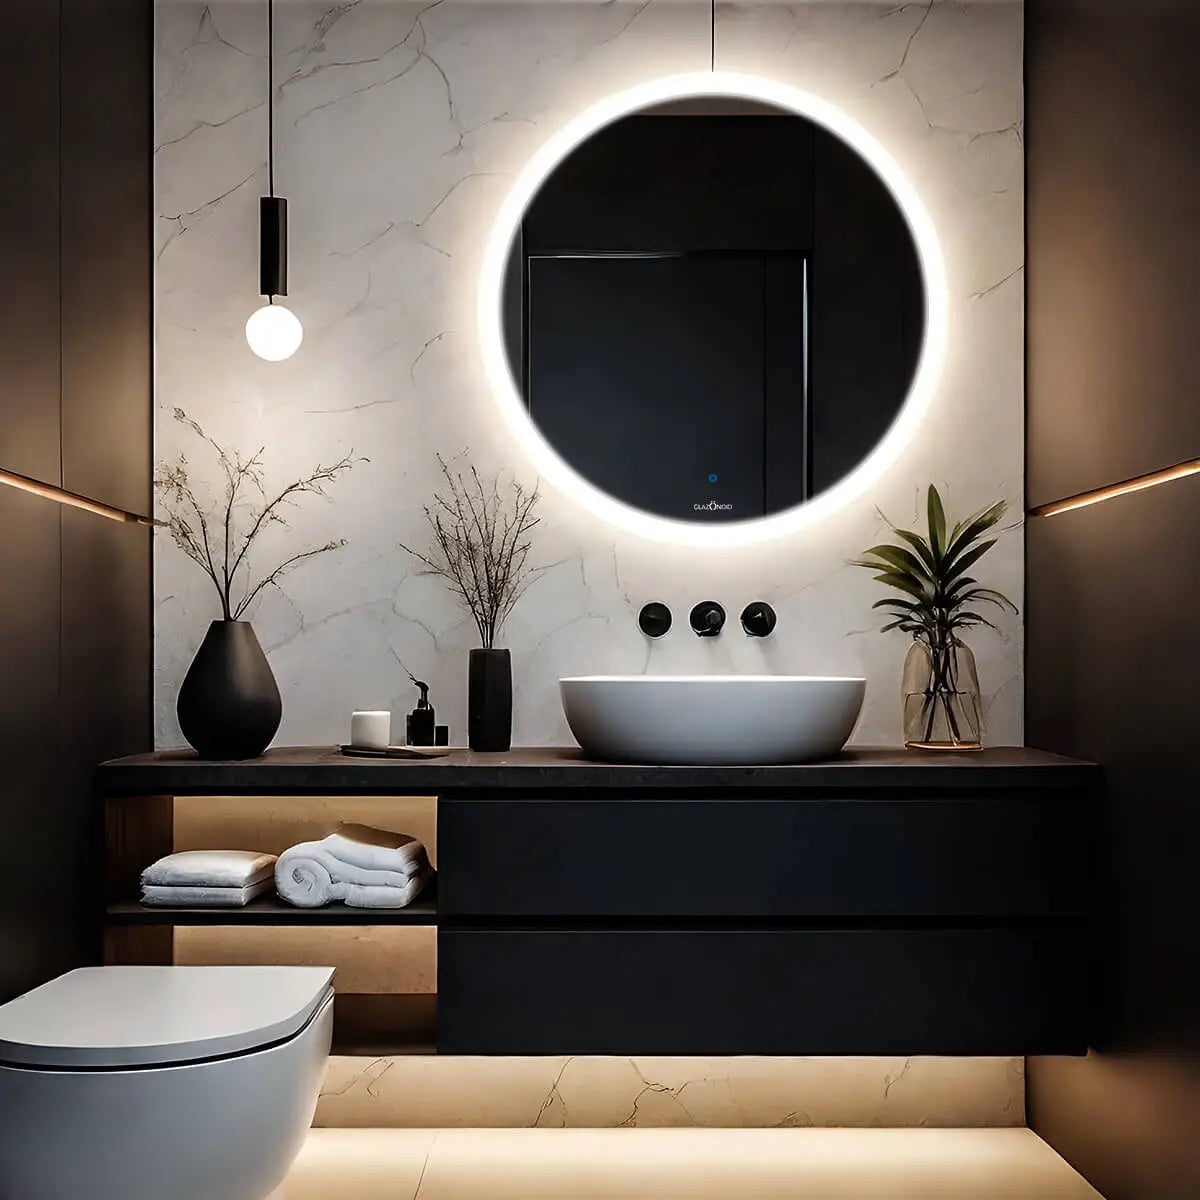 A classic bathroom with a white ceramic sink, toilet, and a round LED mirror. There is a black and white patterned shower curtain in the background. This simple and elegant bathroom design is perfect for any home. This timeless design is both stylish and functional.